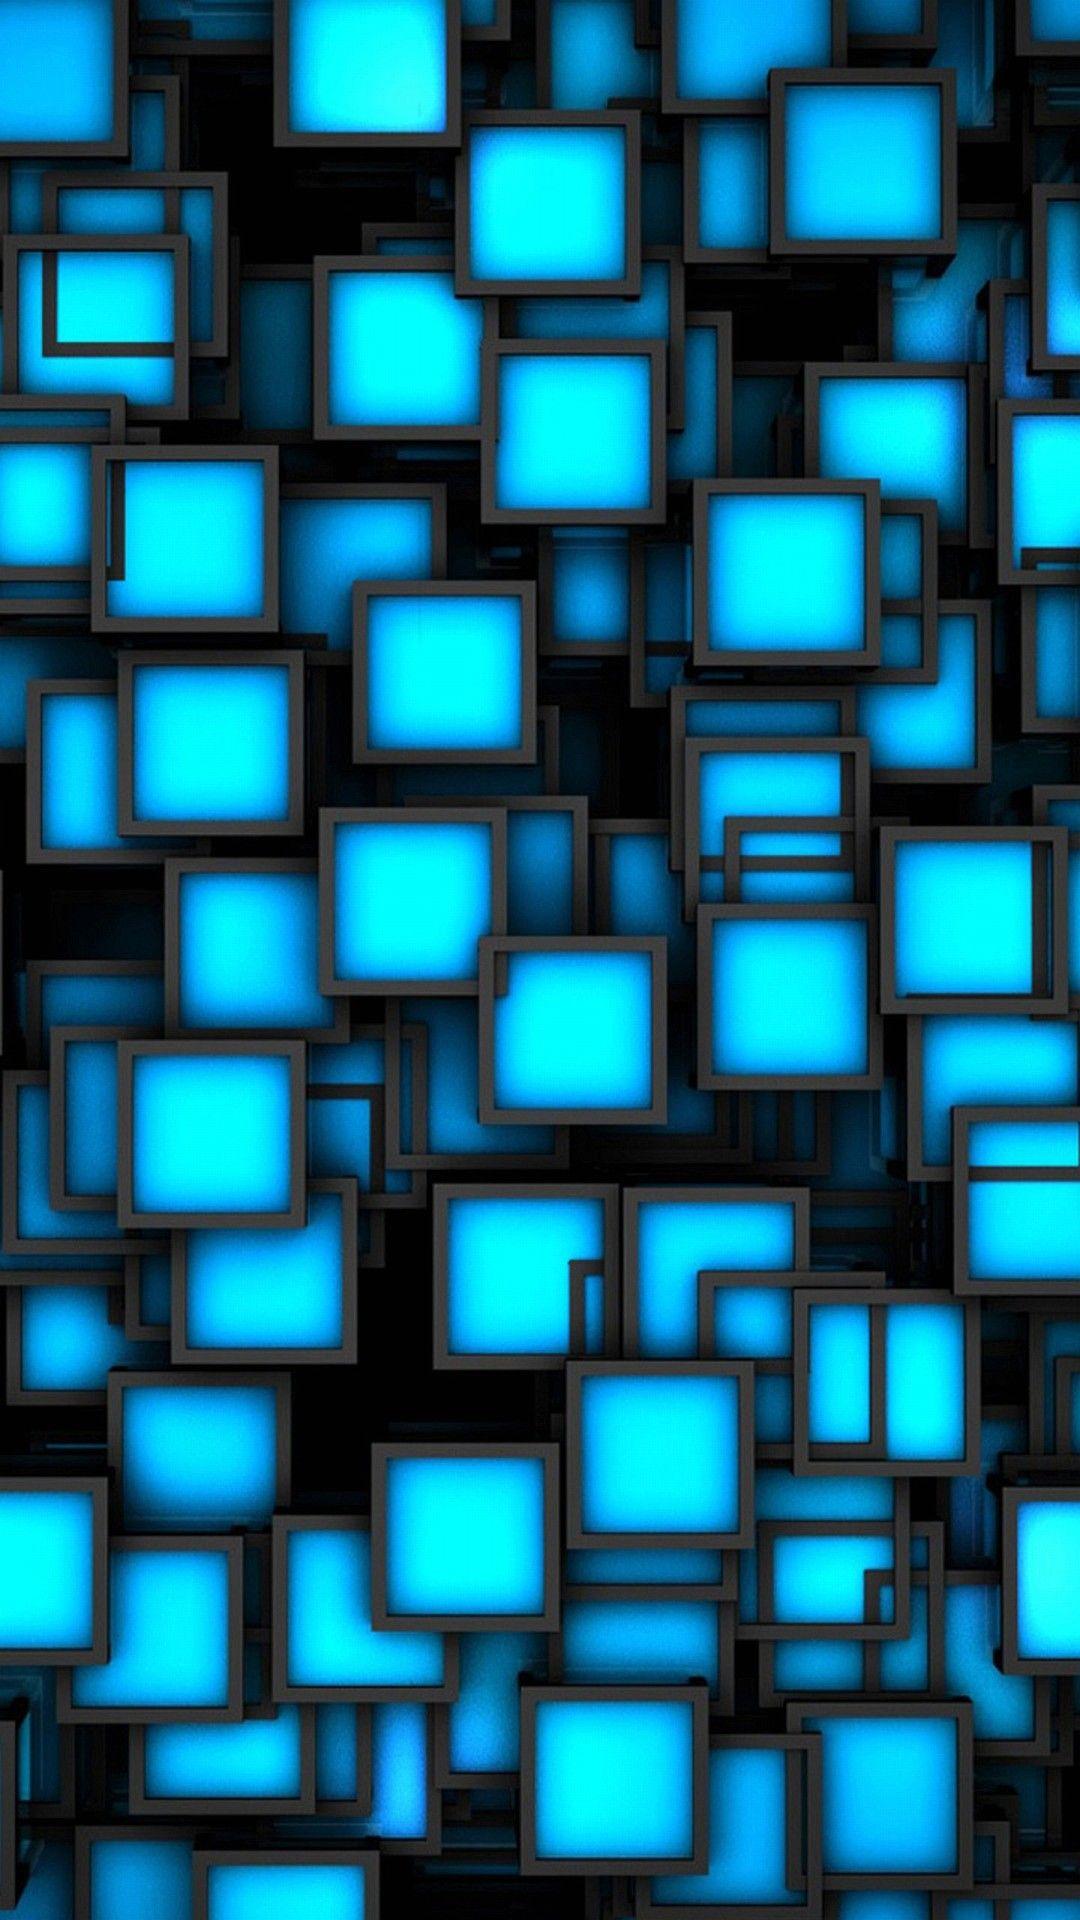 Wallpaper.wiki Photos Iphone 6 Plus Square Blue Black 5 5 Inches PIC